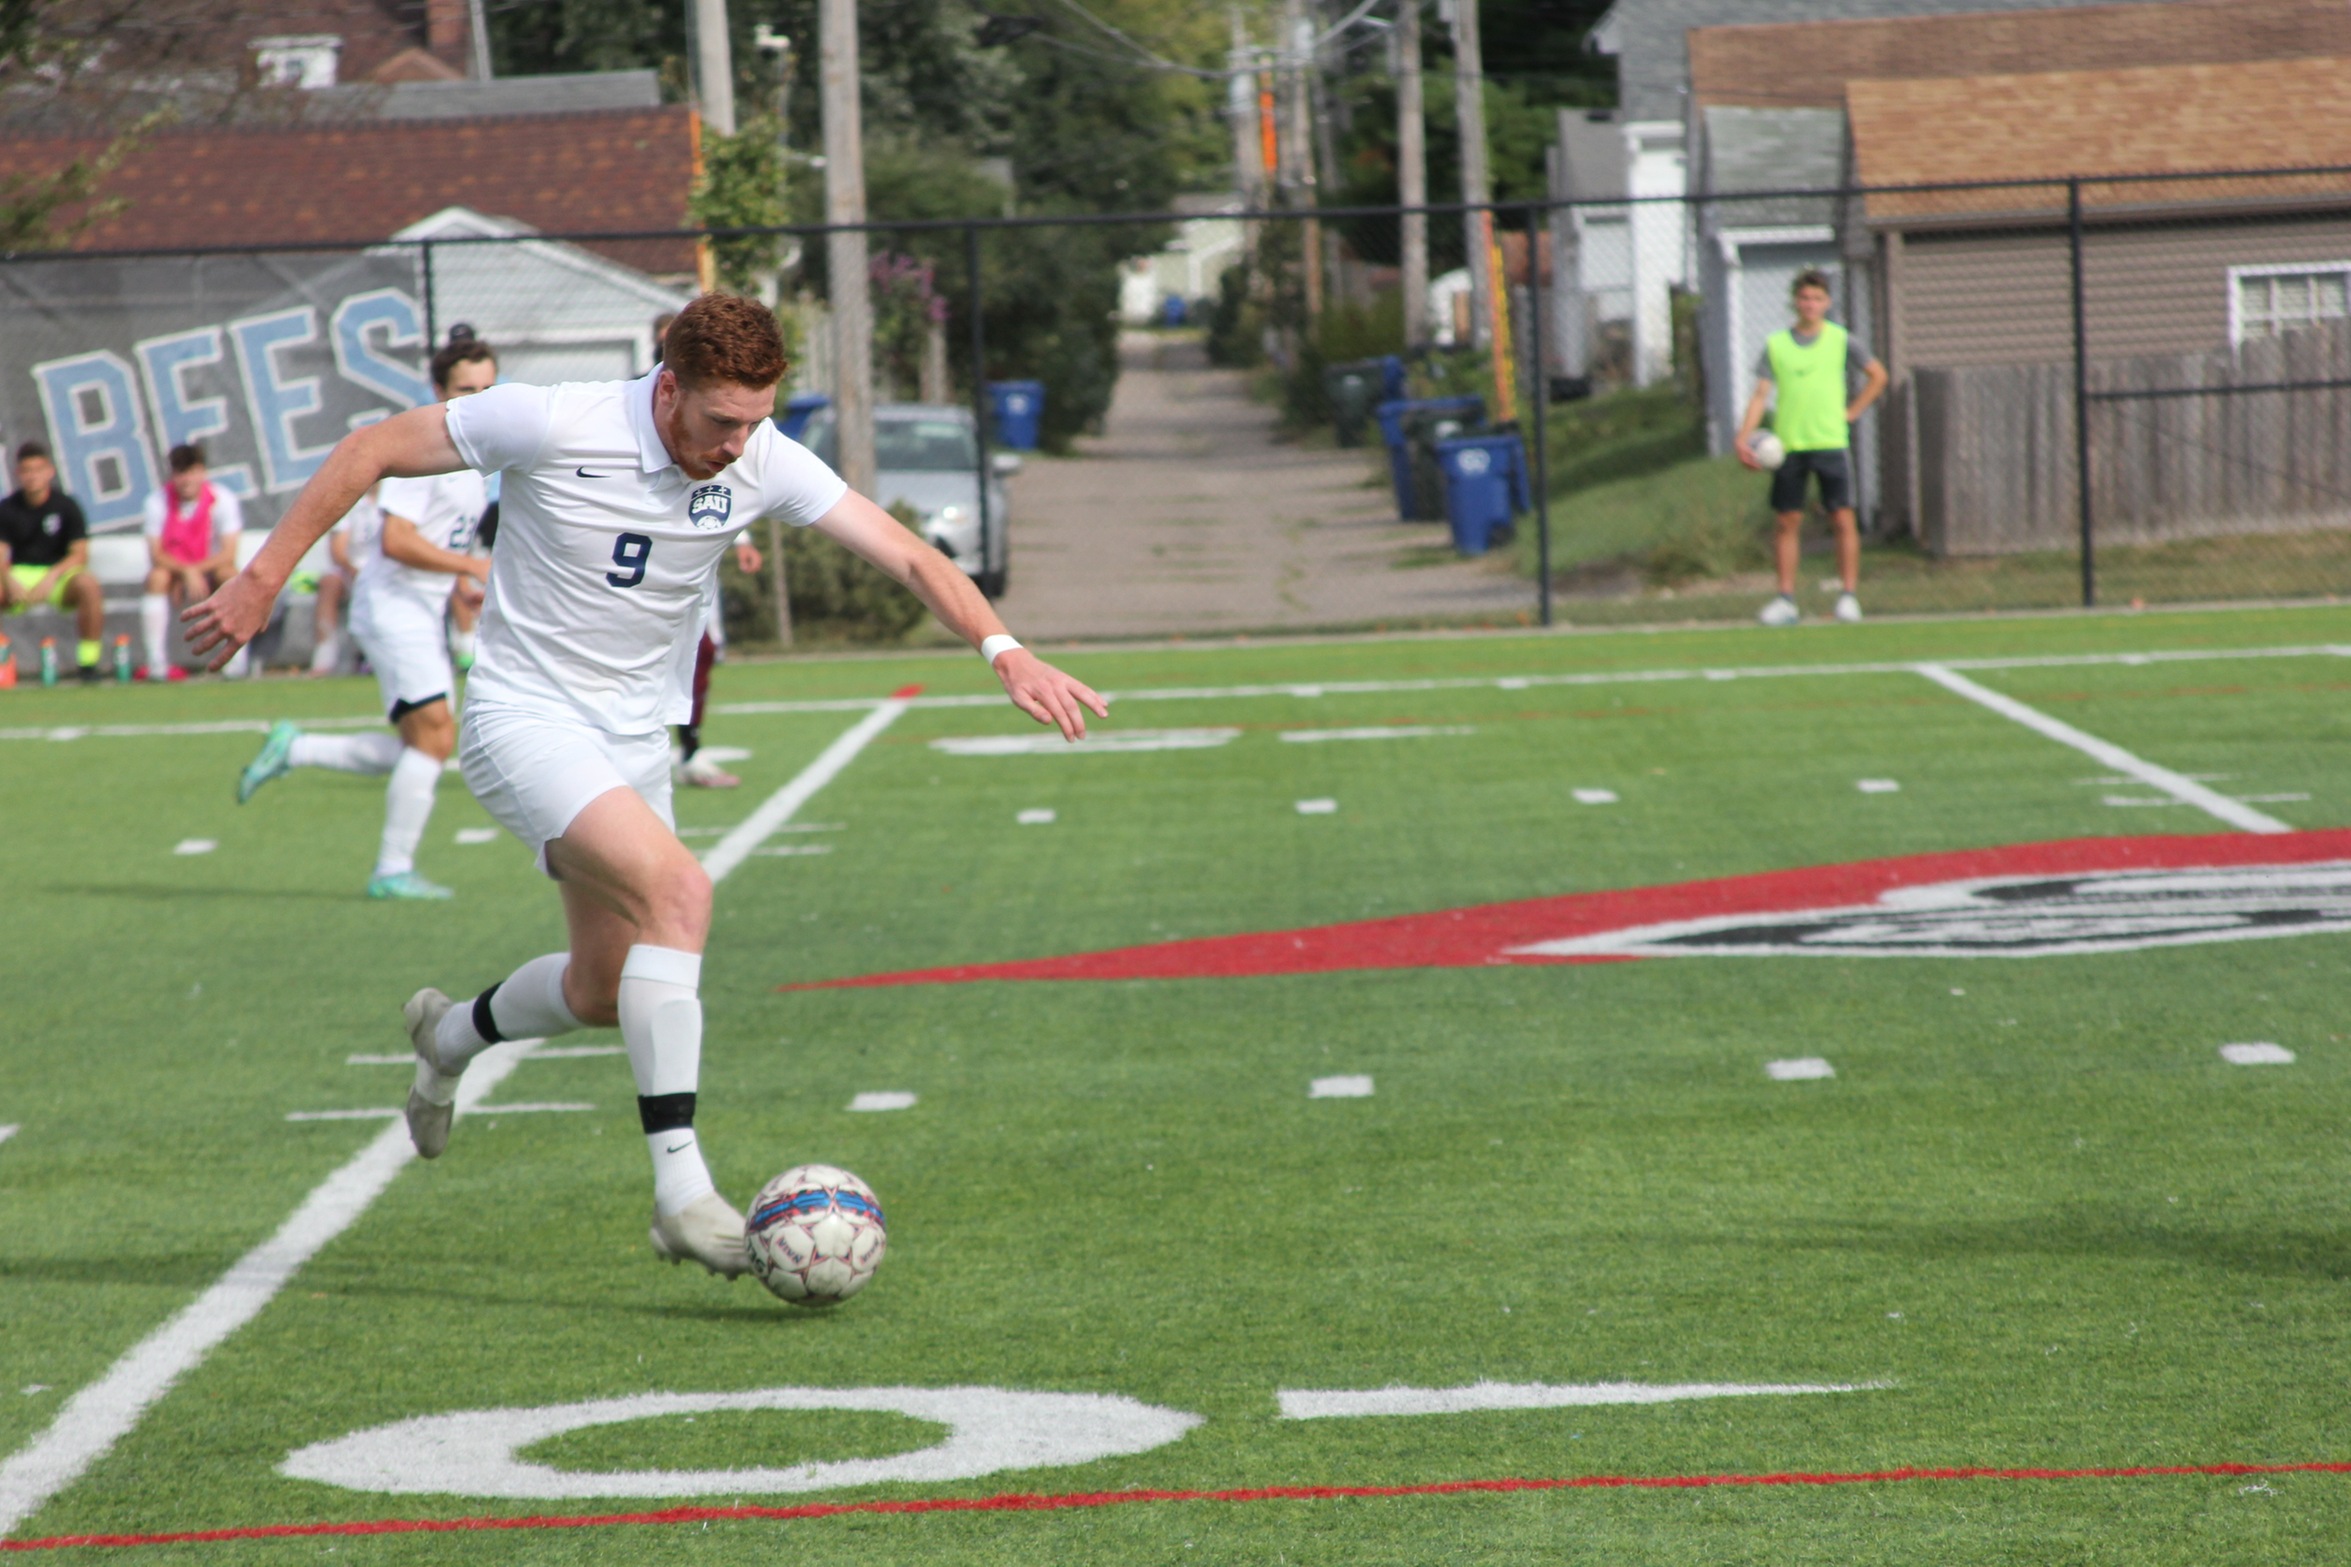 Two first-half goals not enough for St. Ambrose